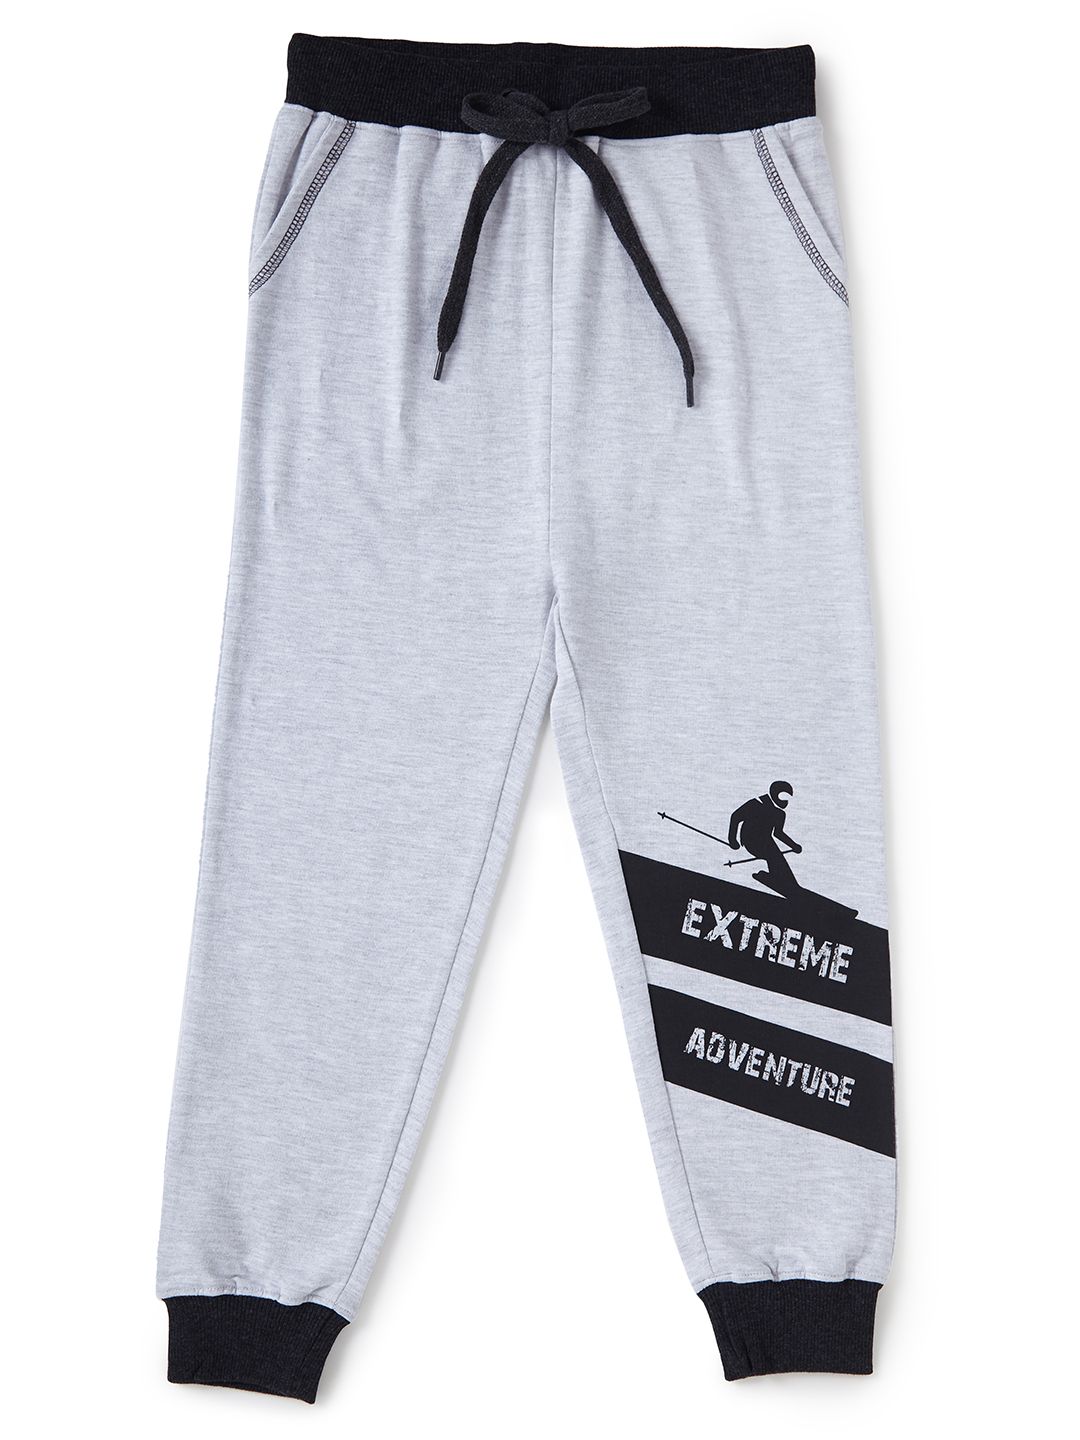 Boys Cotton Track Pant (Grey , 4-12 years)